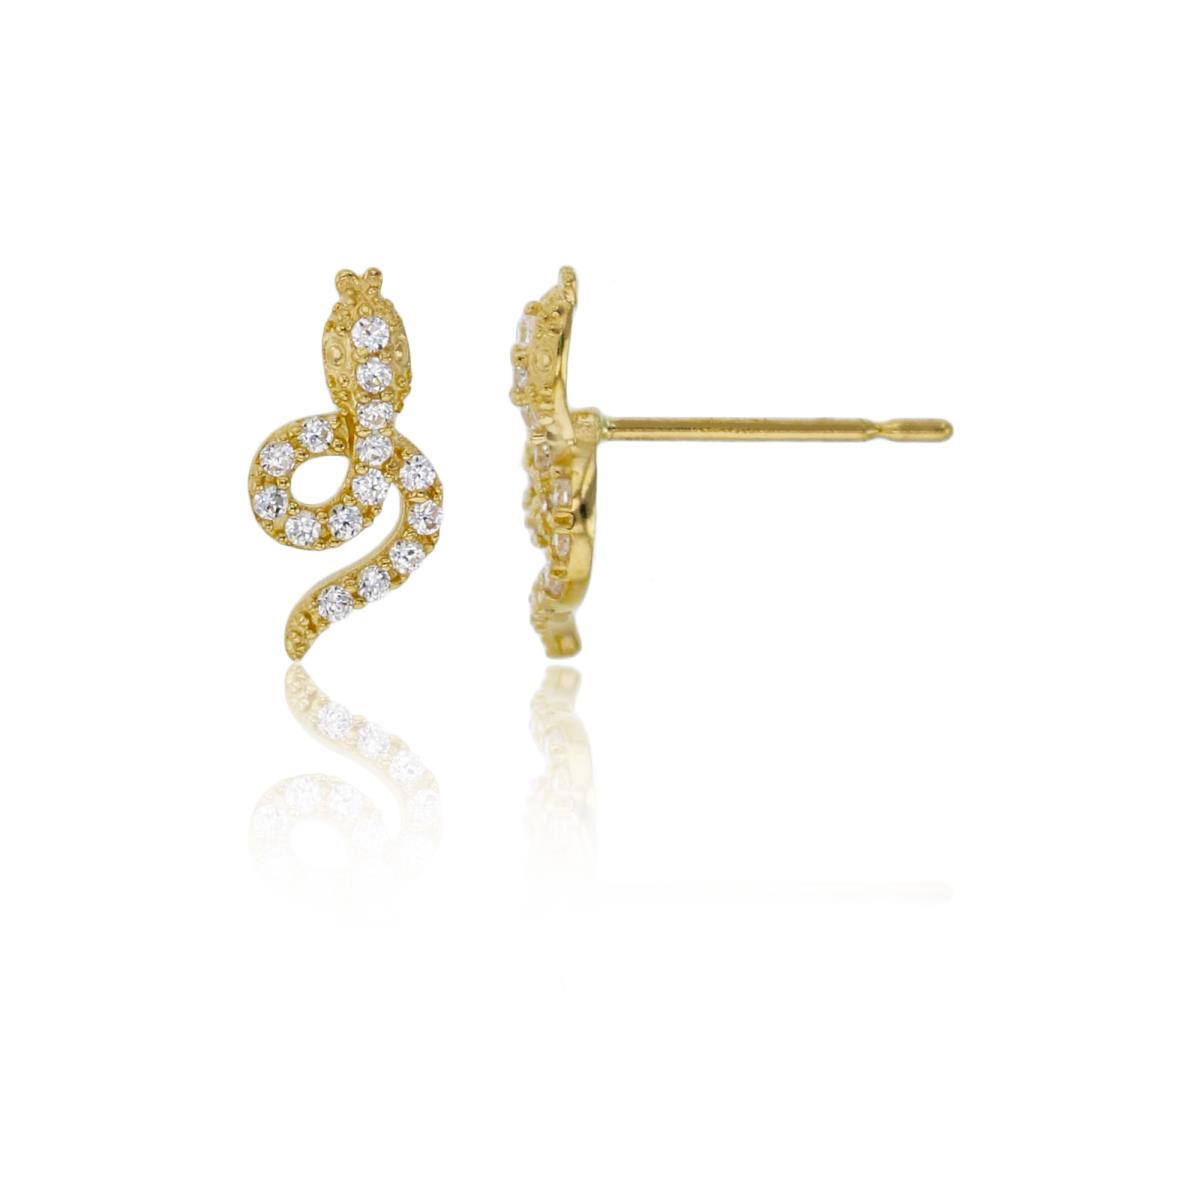 10K Yellow Gold 11x5mm Pave Snake Stud Earring